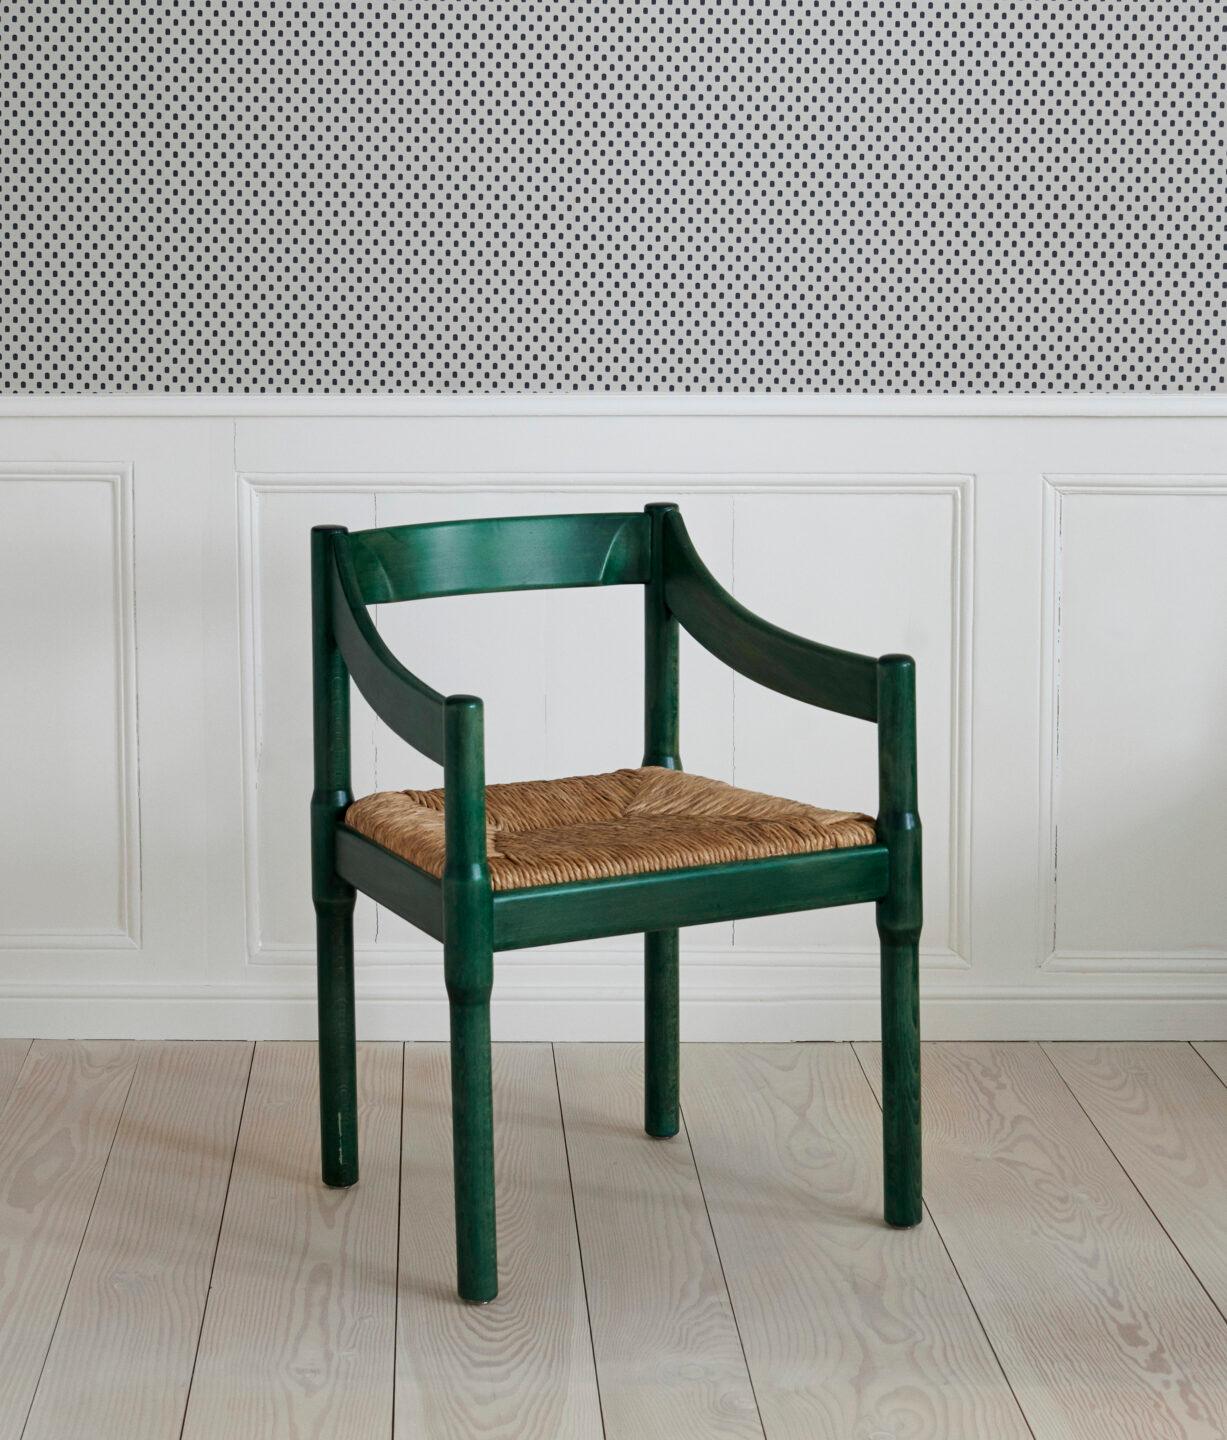 Vico Magistretti
Italy, 1959

Carimate armchair. Green painted wood, wicker seat.

Industrial designer and architect Vico Magistretti (1920-2006) graduated from the Faculty of Architecture at Politecnico di Milano in 1945.
The Carimate chair –